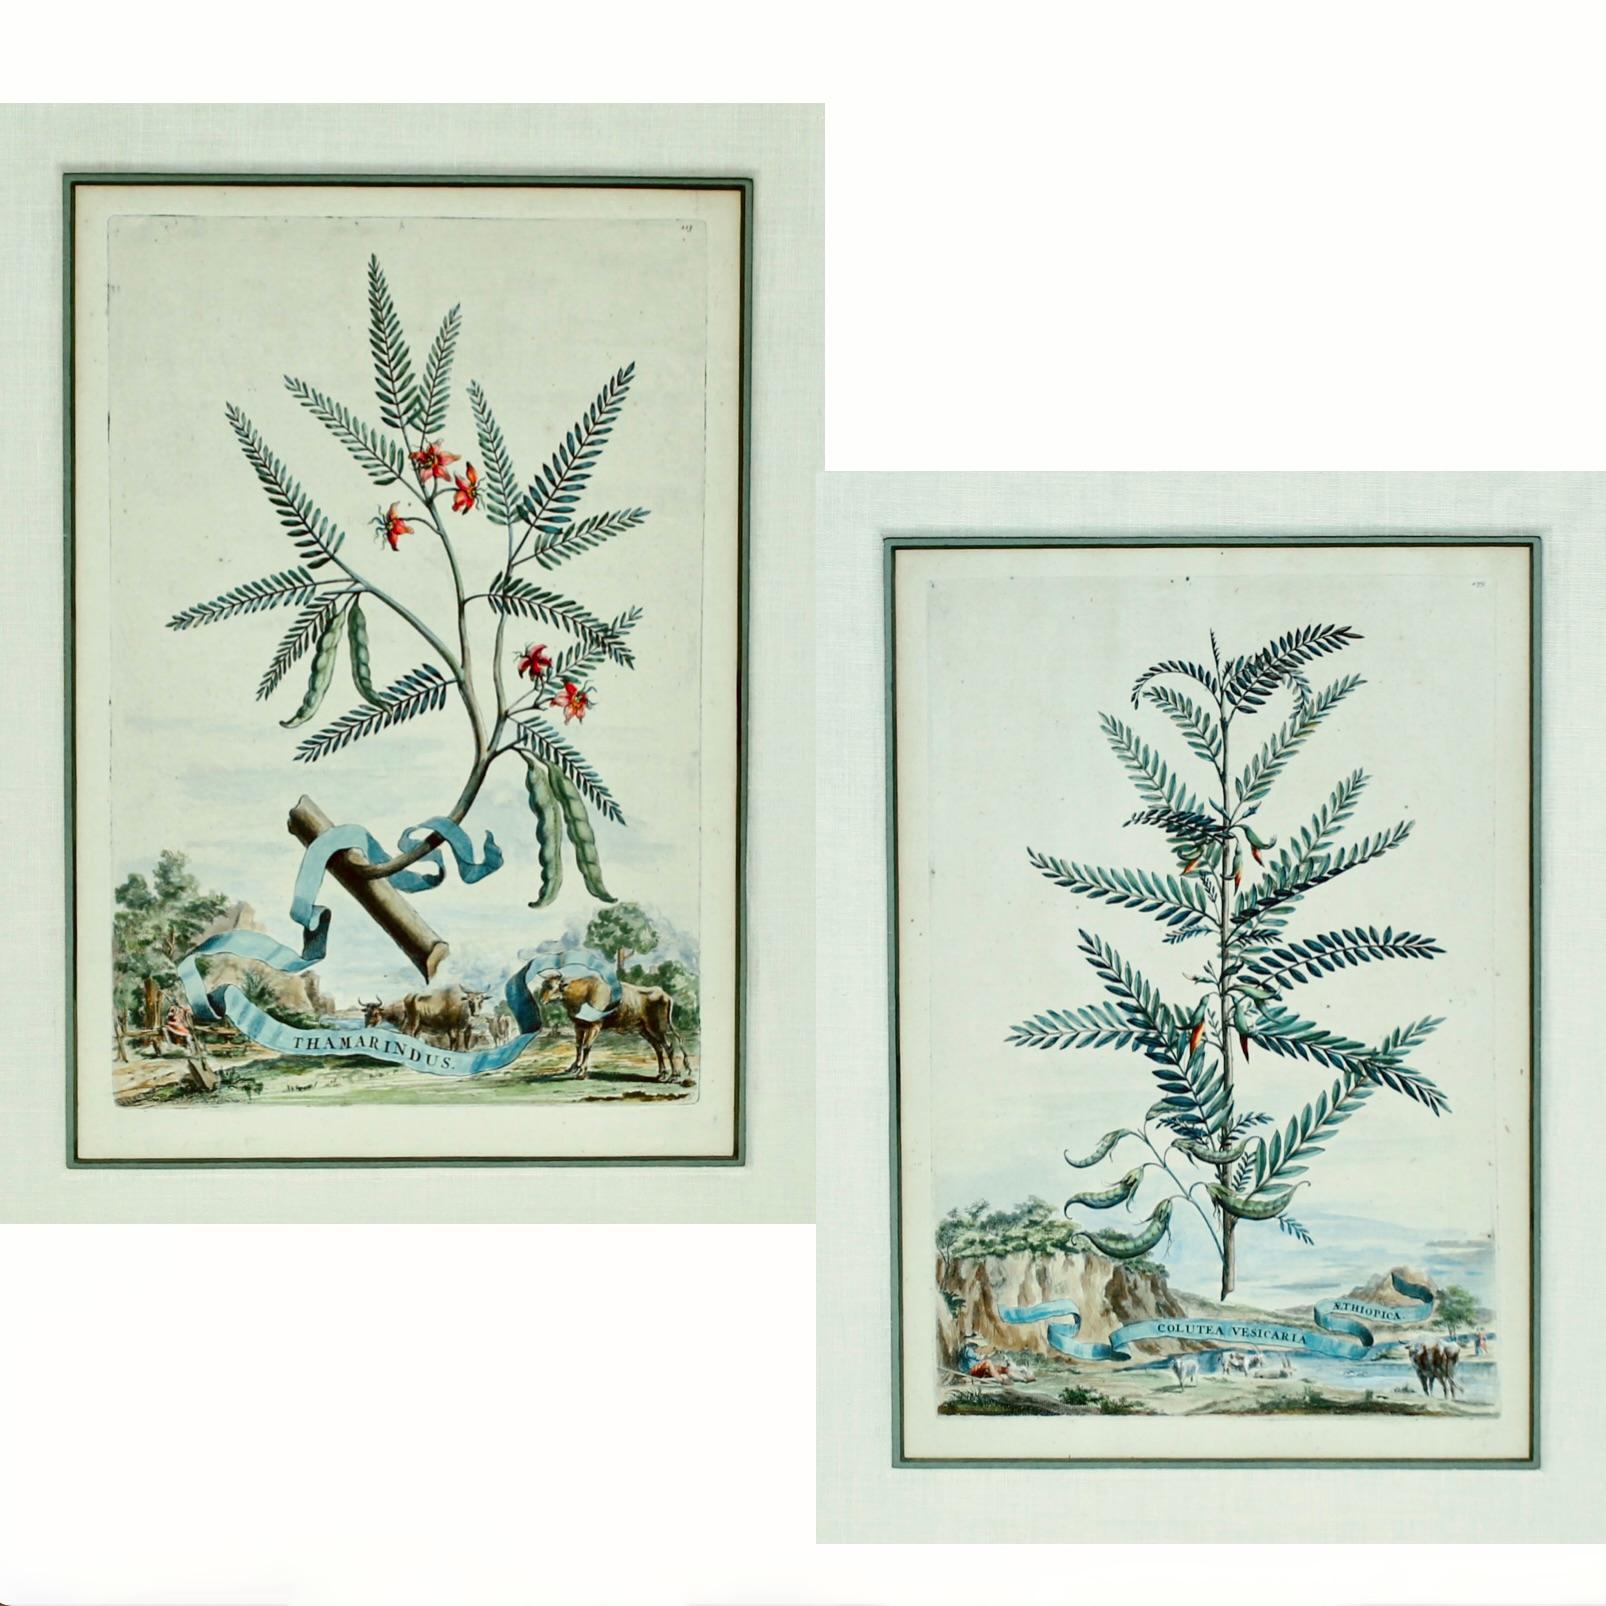 A fine pair of 17th century botanical engravings of blooming trees, Plates 113 and 175, the Tamarind and the Colutea Vesicaria Senna Tree from 